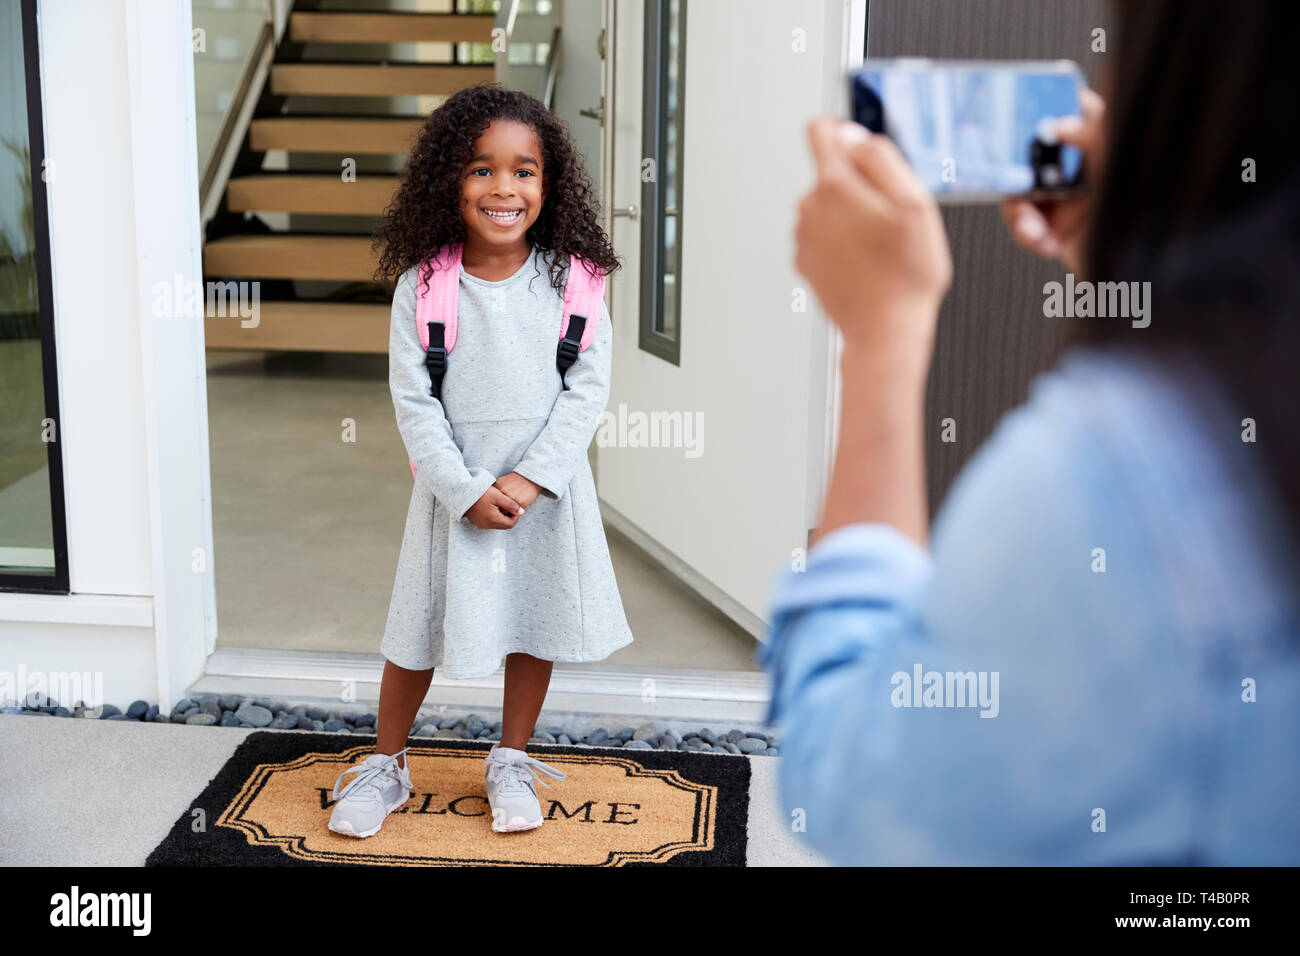 Mother Taking Photo Of Daughter With Cell Phone On First Day Back At School Stock Photo